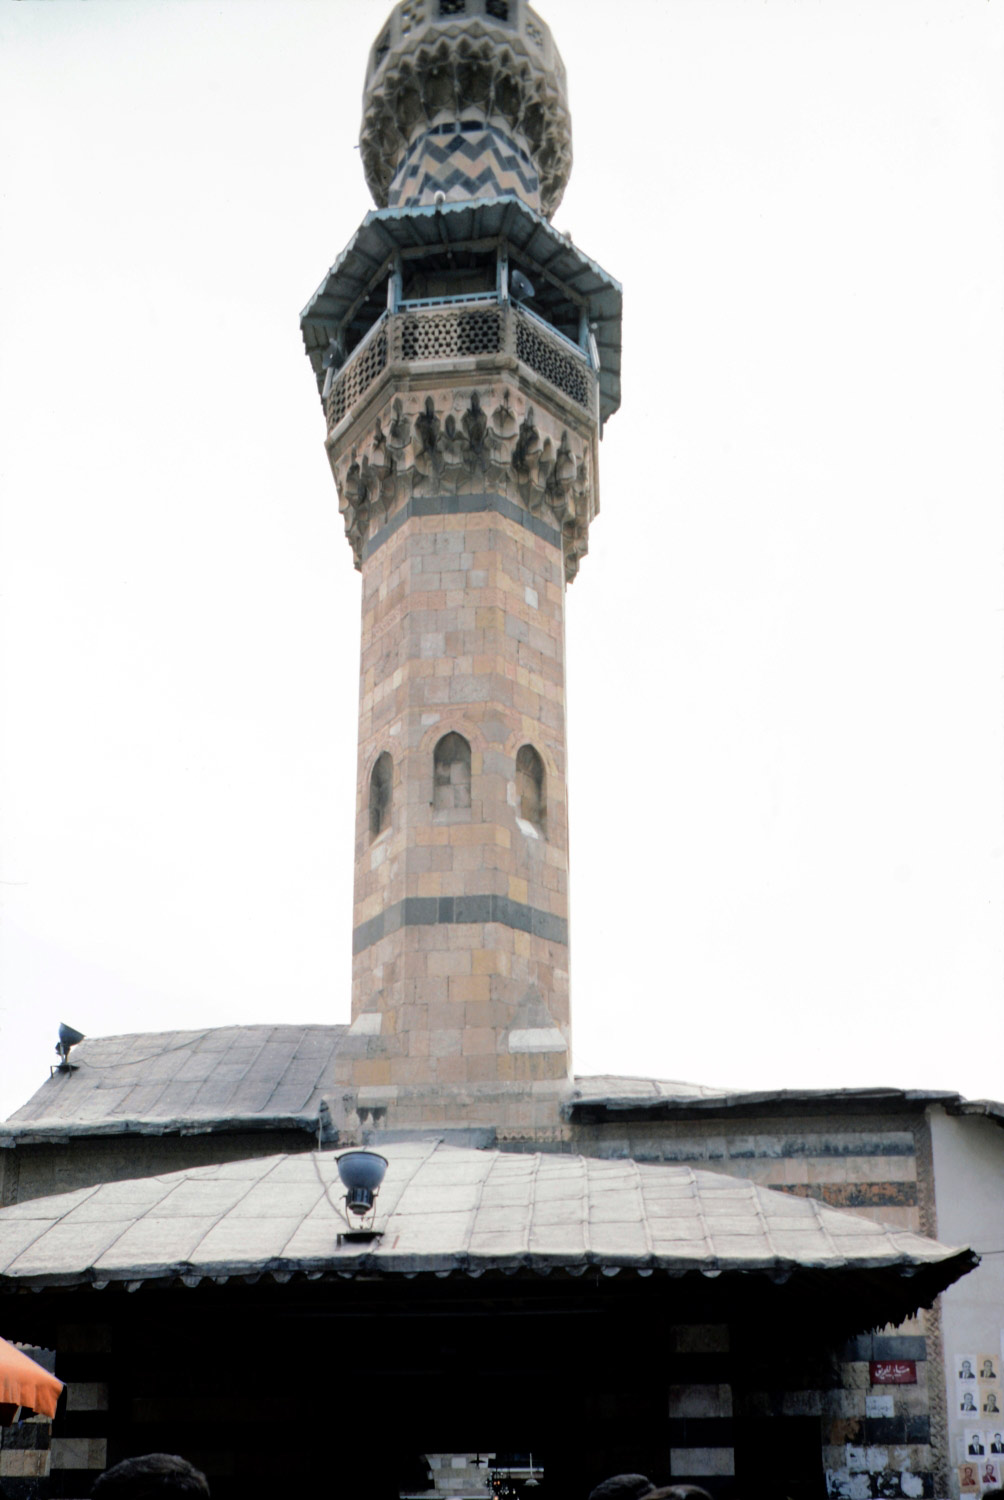 Lower section of the minaret